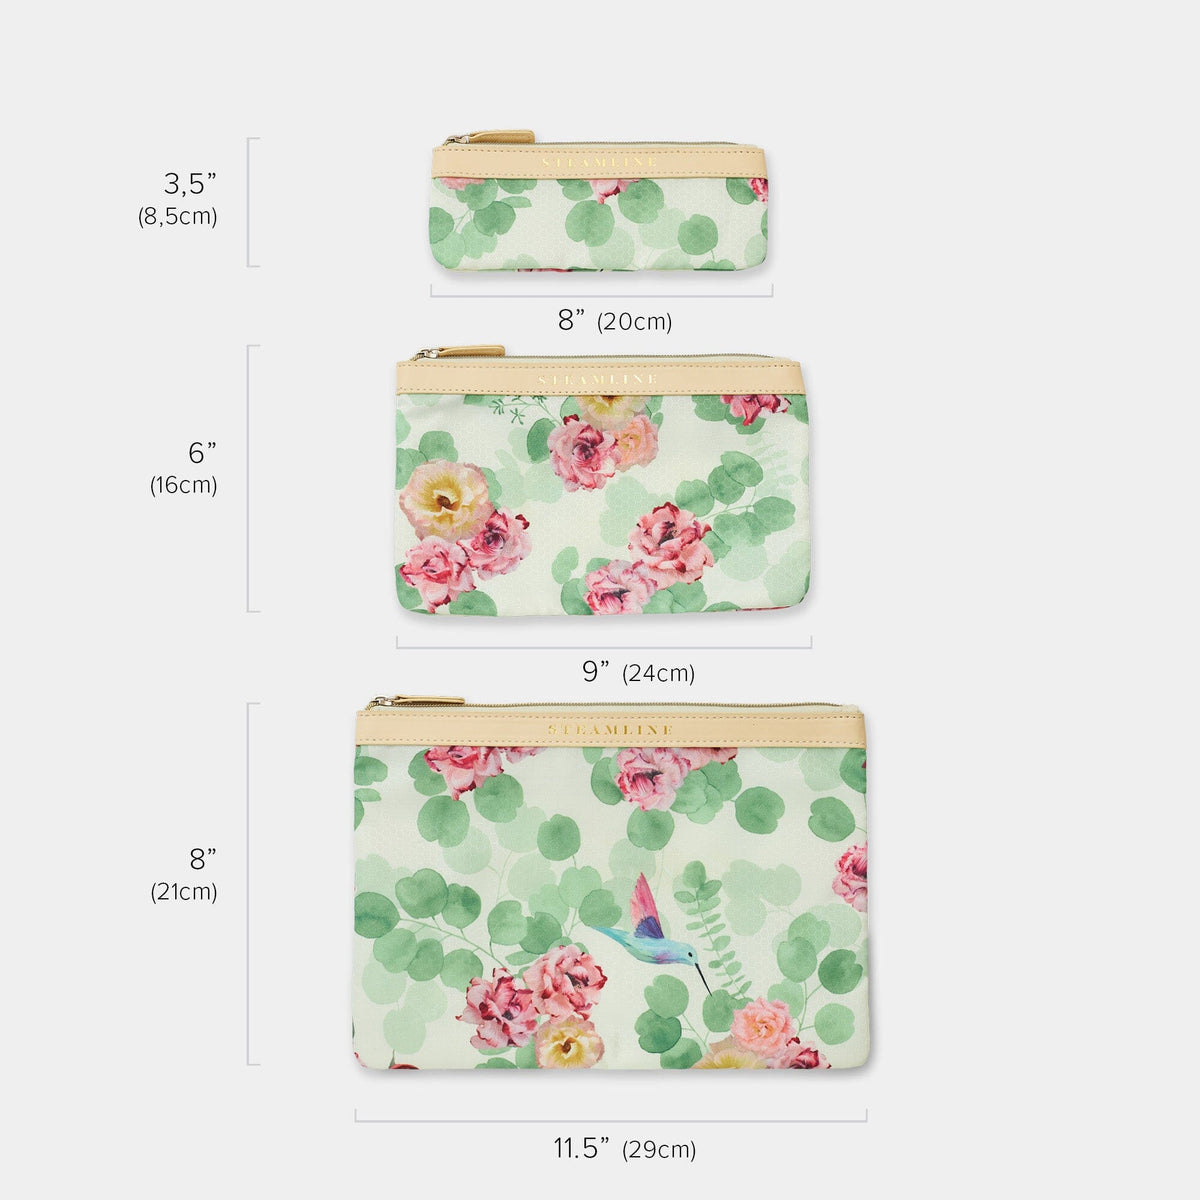 The Floral - Cosmetic Case Set